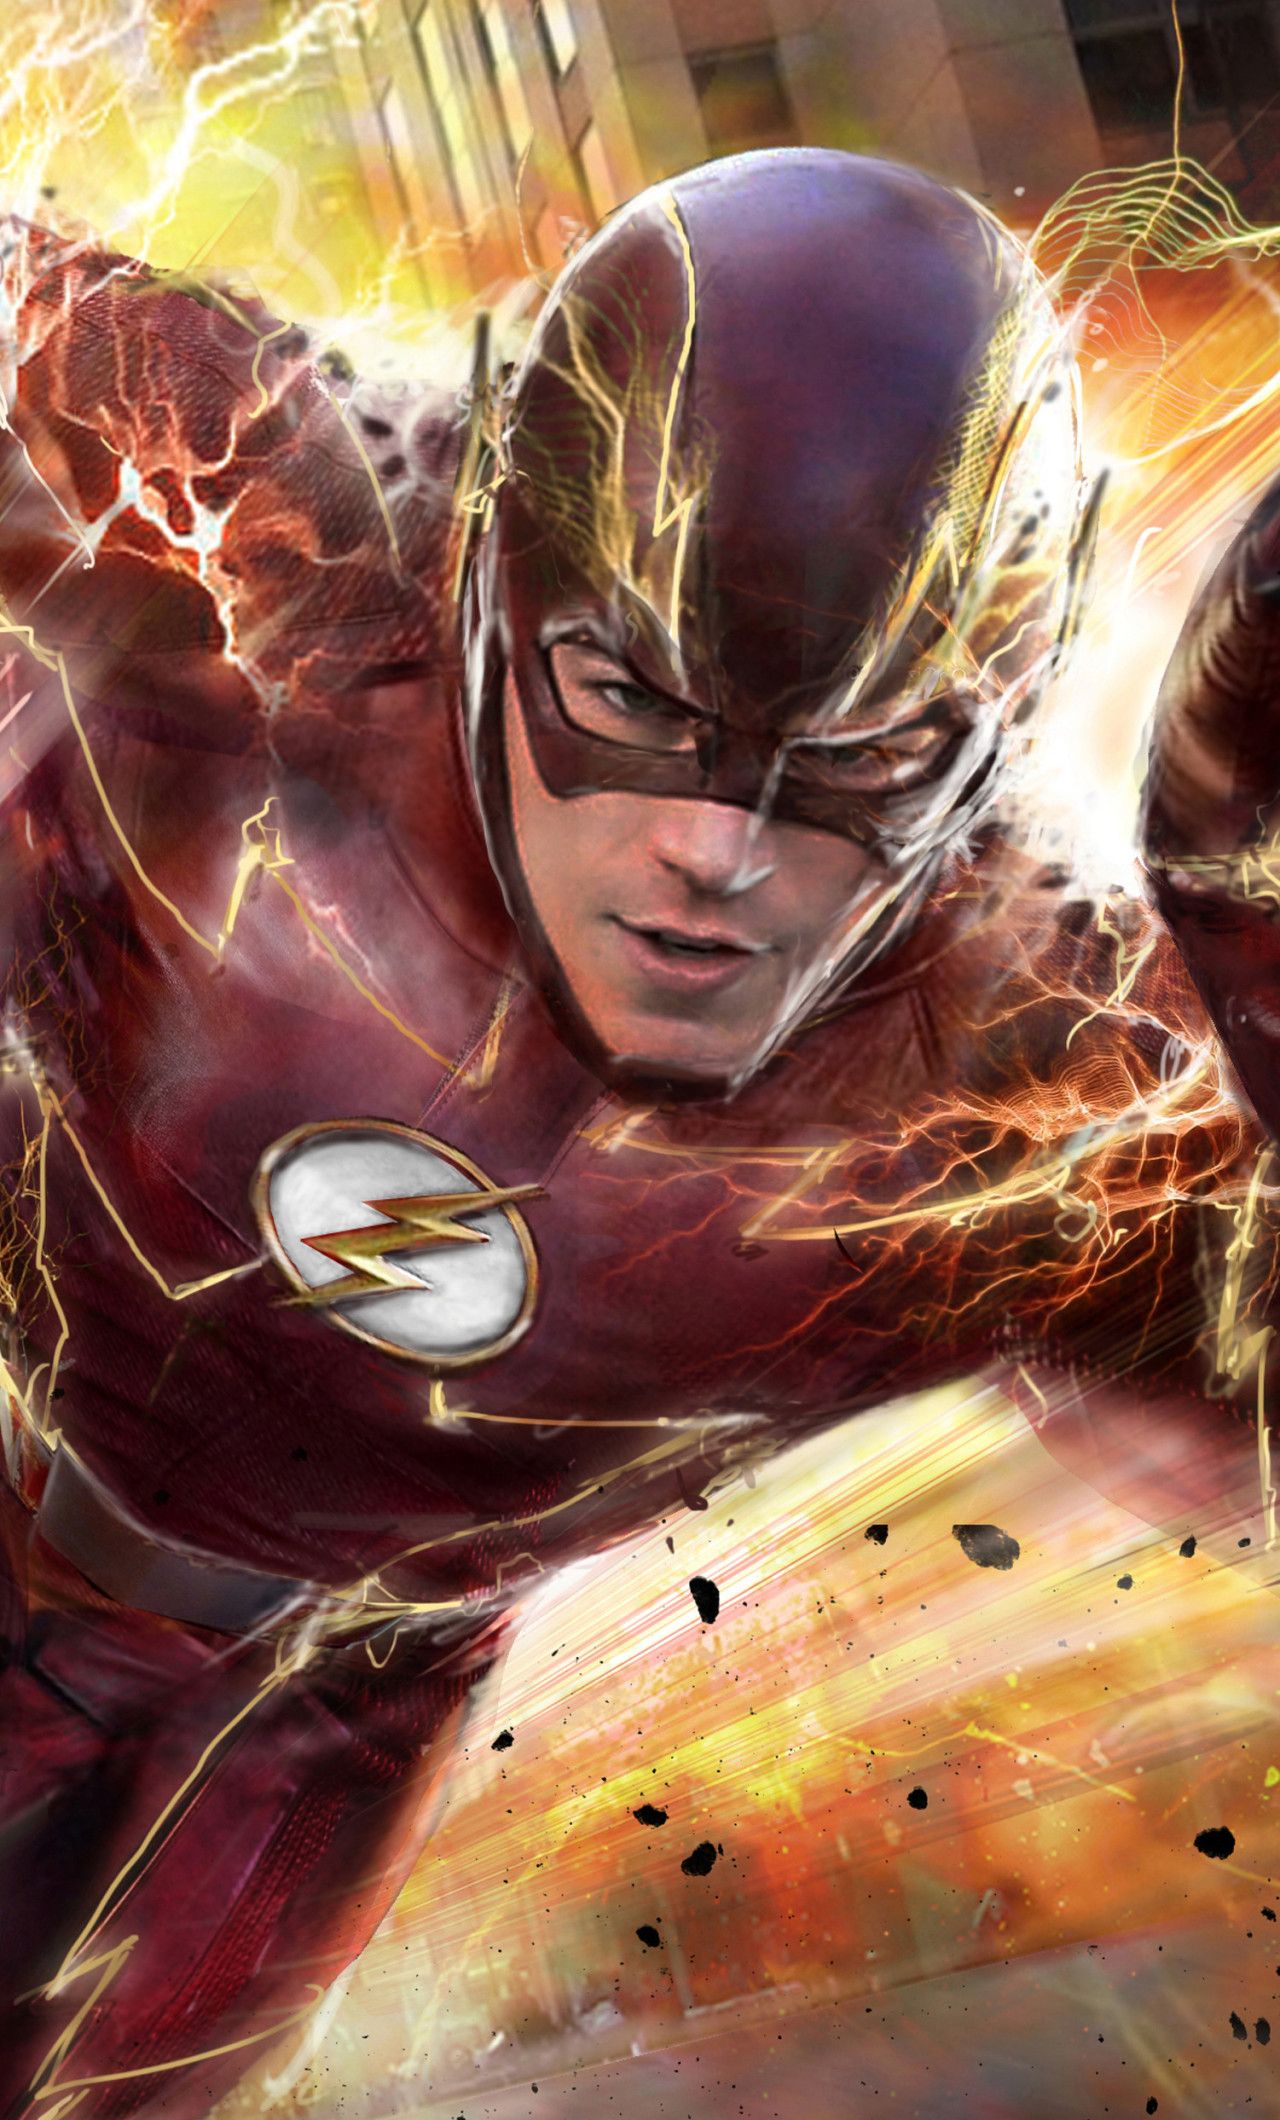 The Flash 4k Wallpapers by greatloveart on DeviantArt